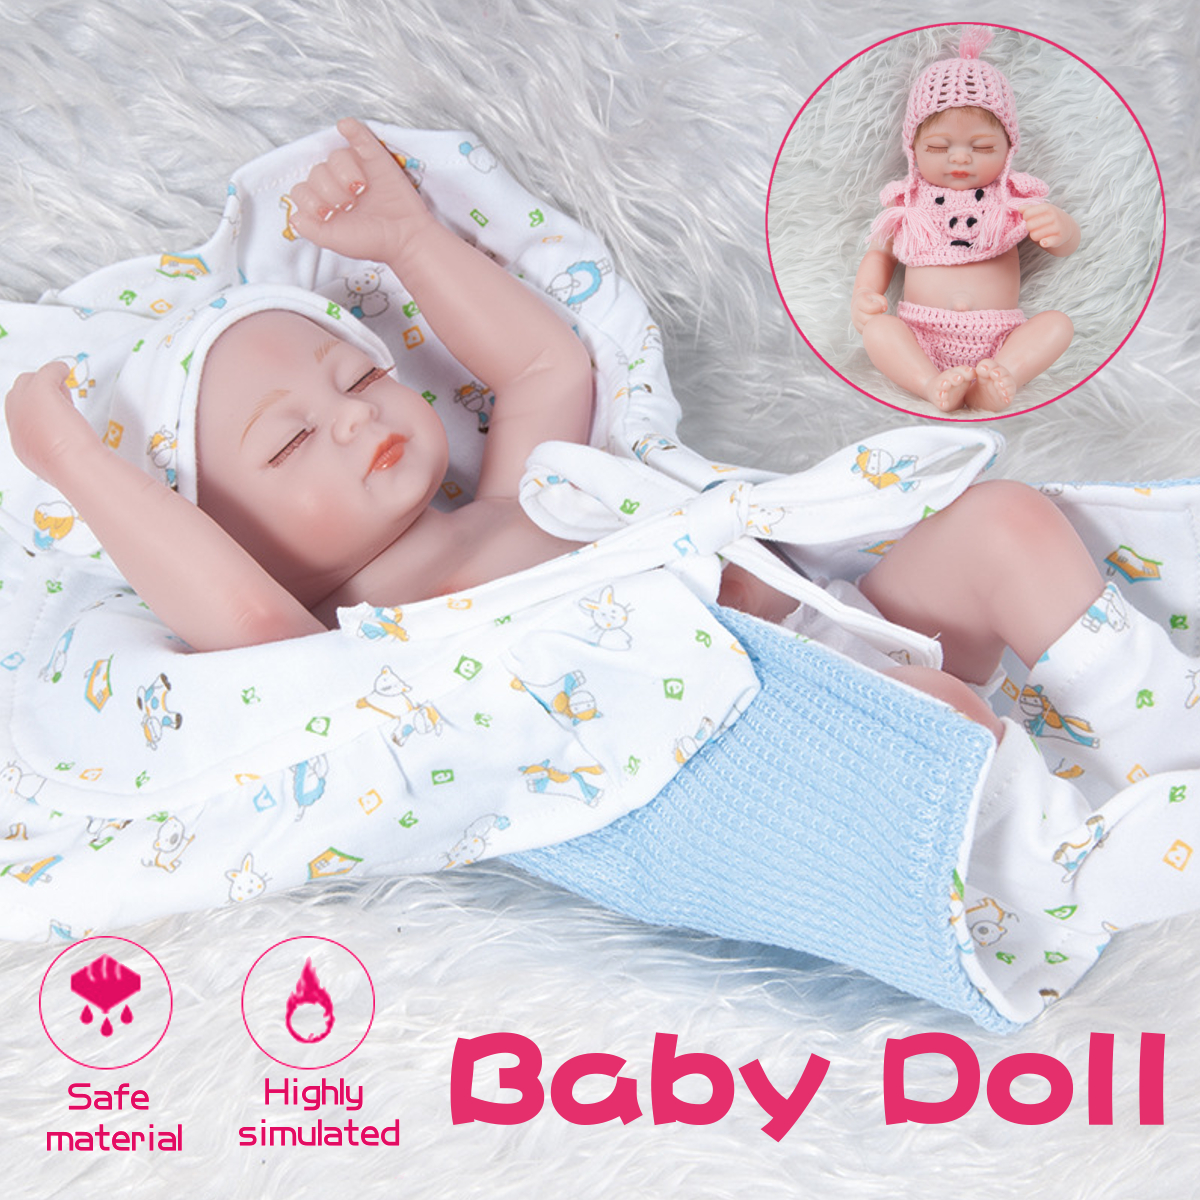 28CM-Soft-Silicone-Vinyl-Realistic-Sleeping-Reborn-Lifelike-Newborn-Baby-Doll-Toy-with-Moveable-Head-1731373-2